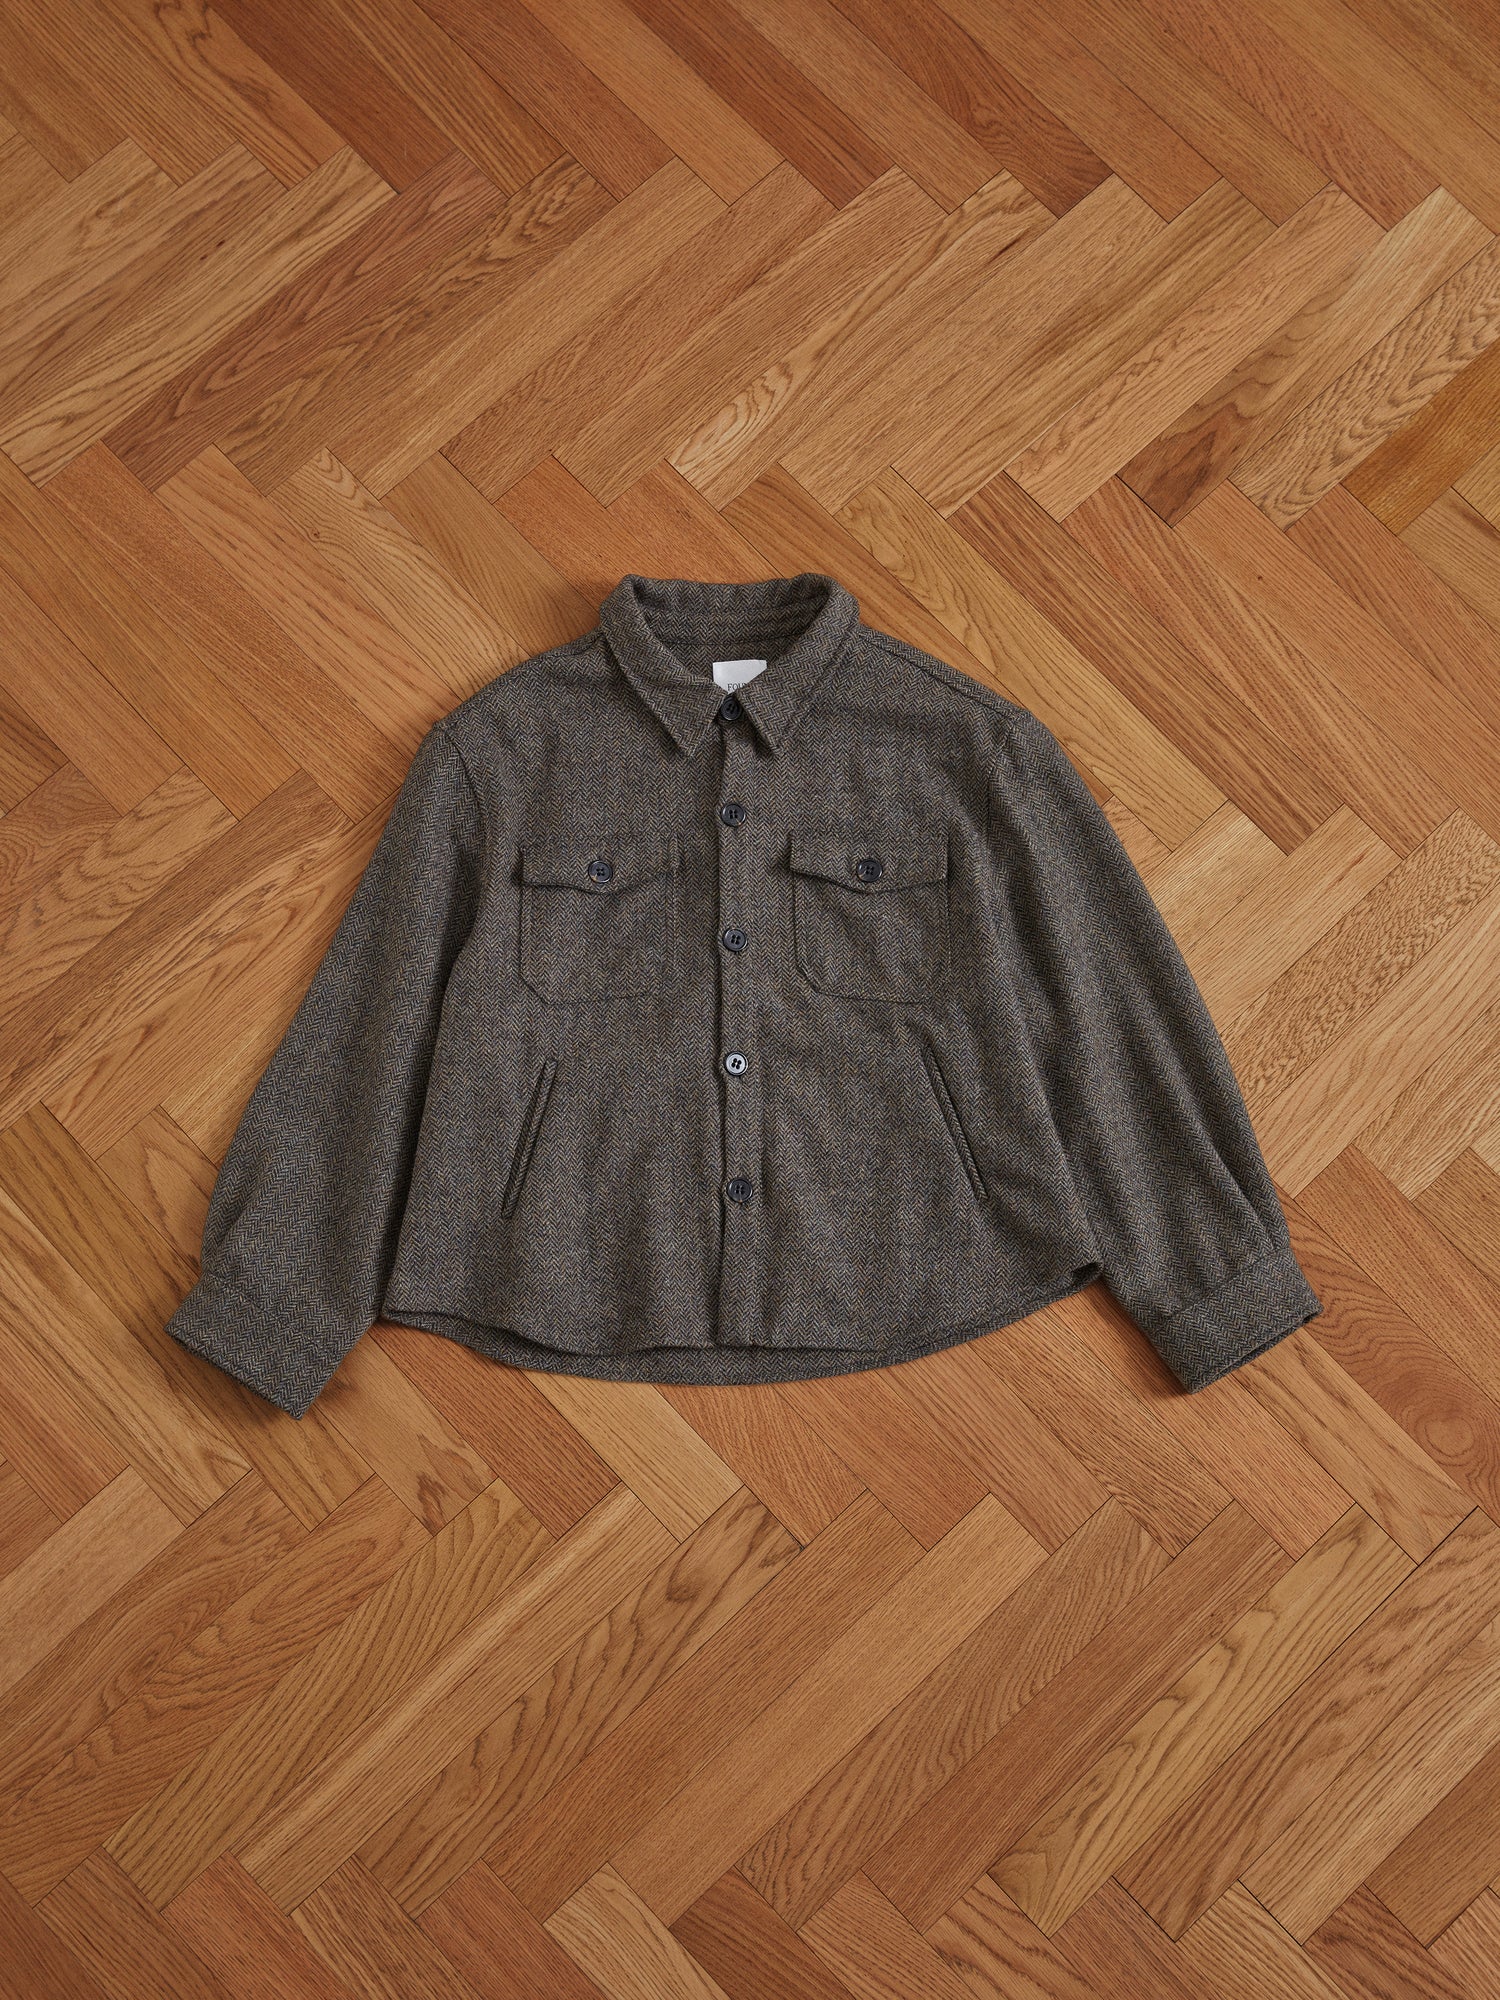 A Raven Herringbone Overshirt by Found on a wooden floor.